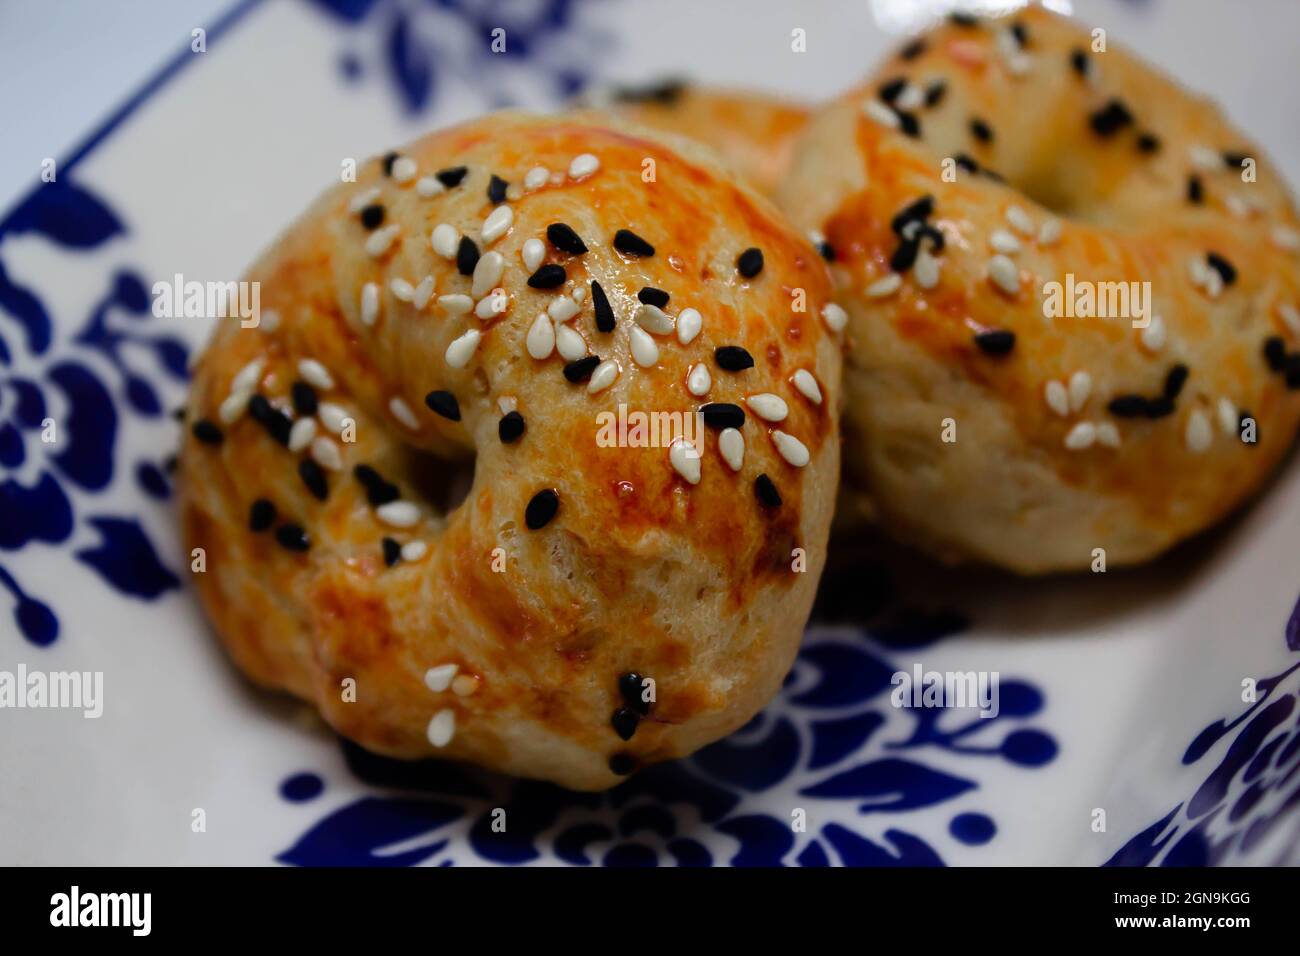 Turkish style pastry made by grandmother. Freshly baked pastry with cheese filling. Oven bake products. Stock Photo